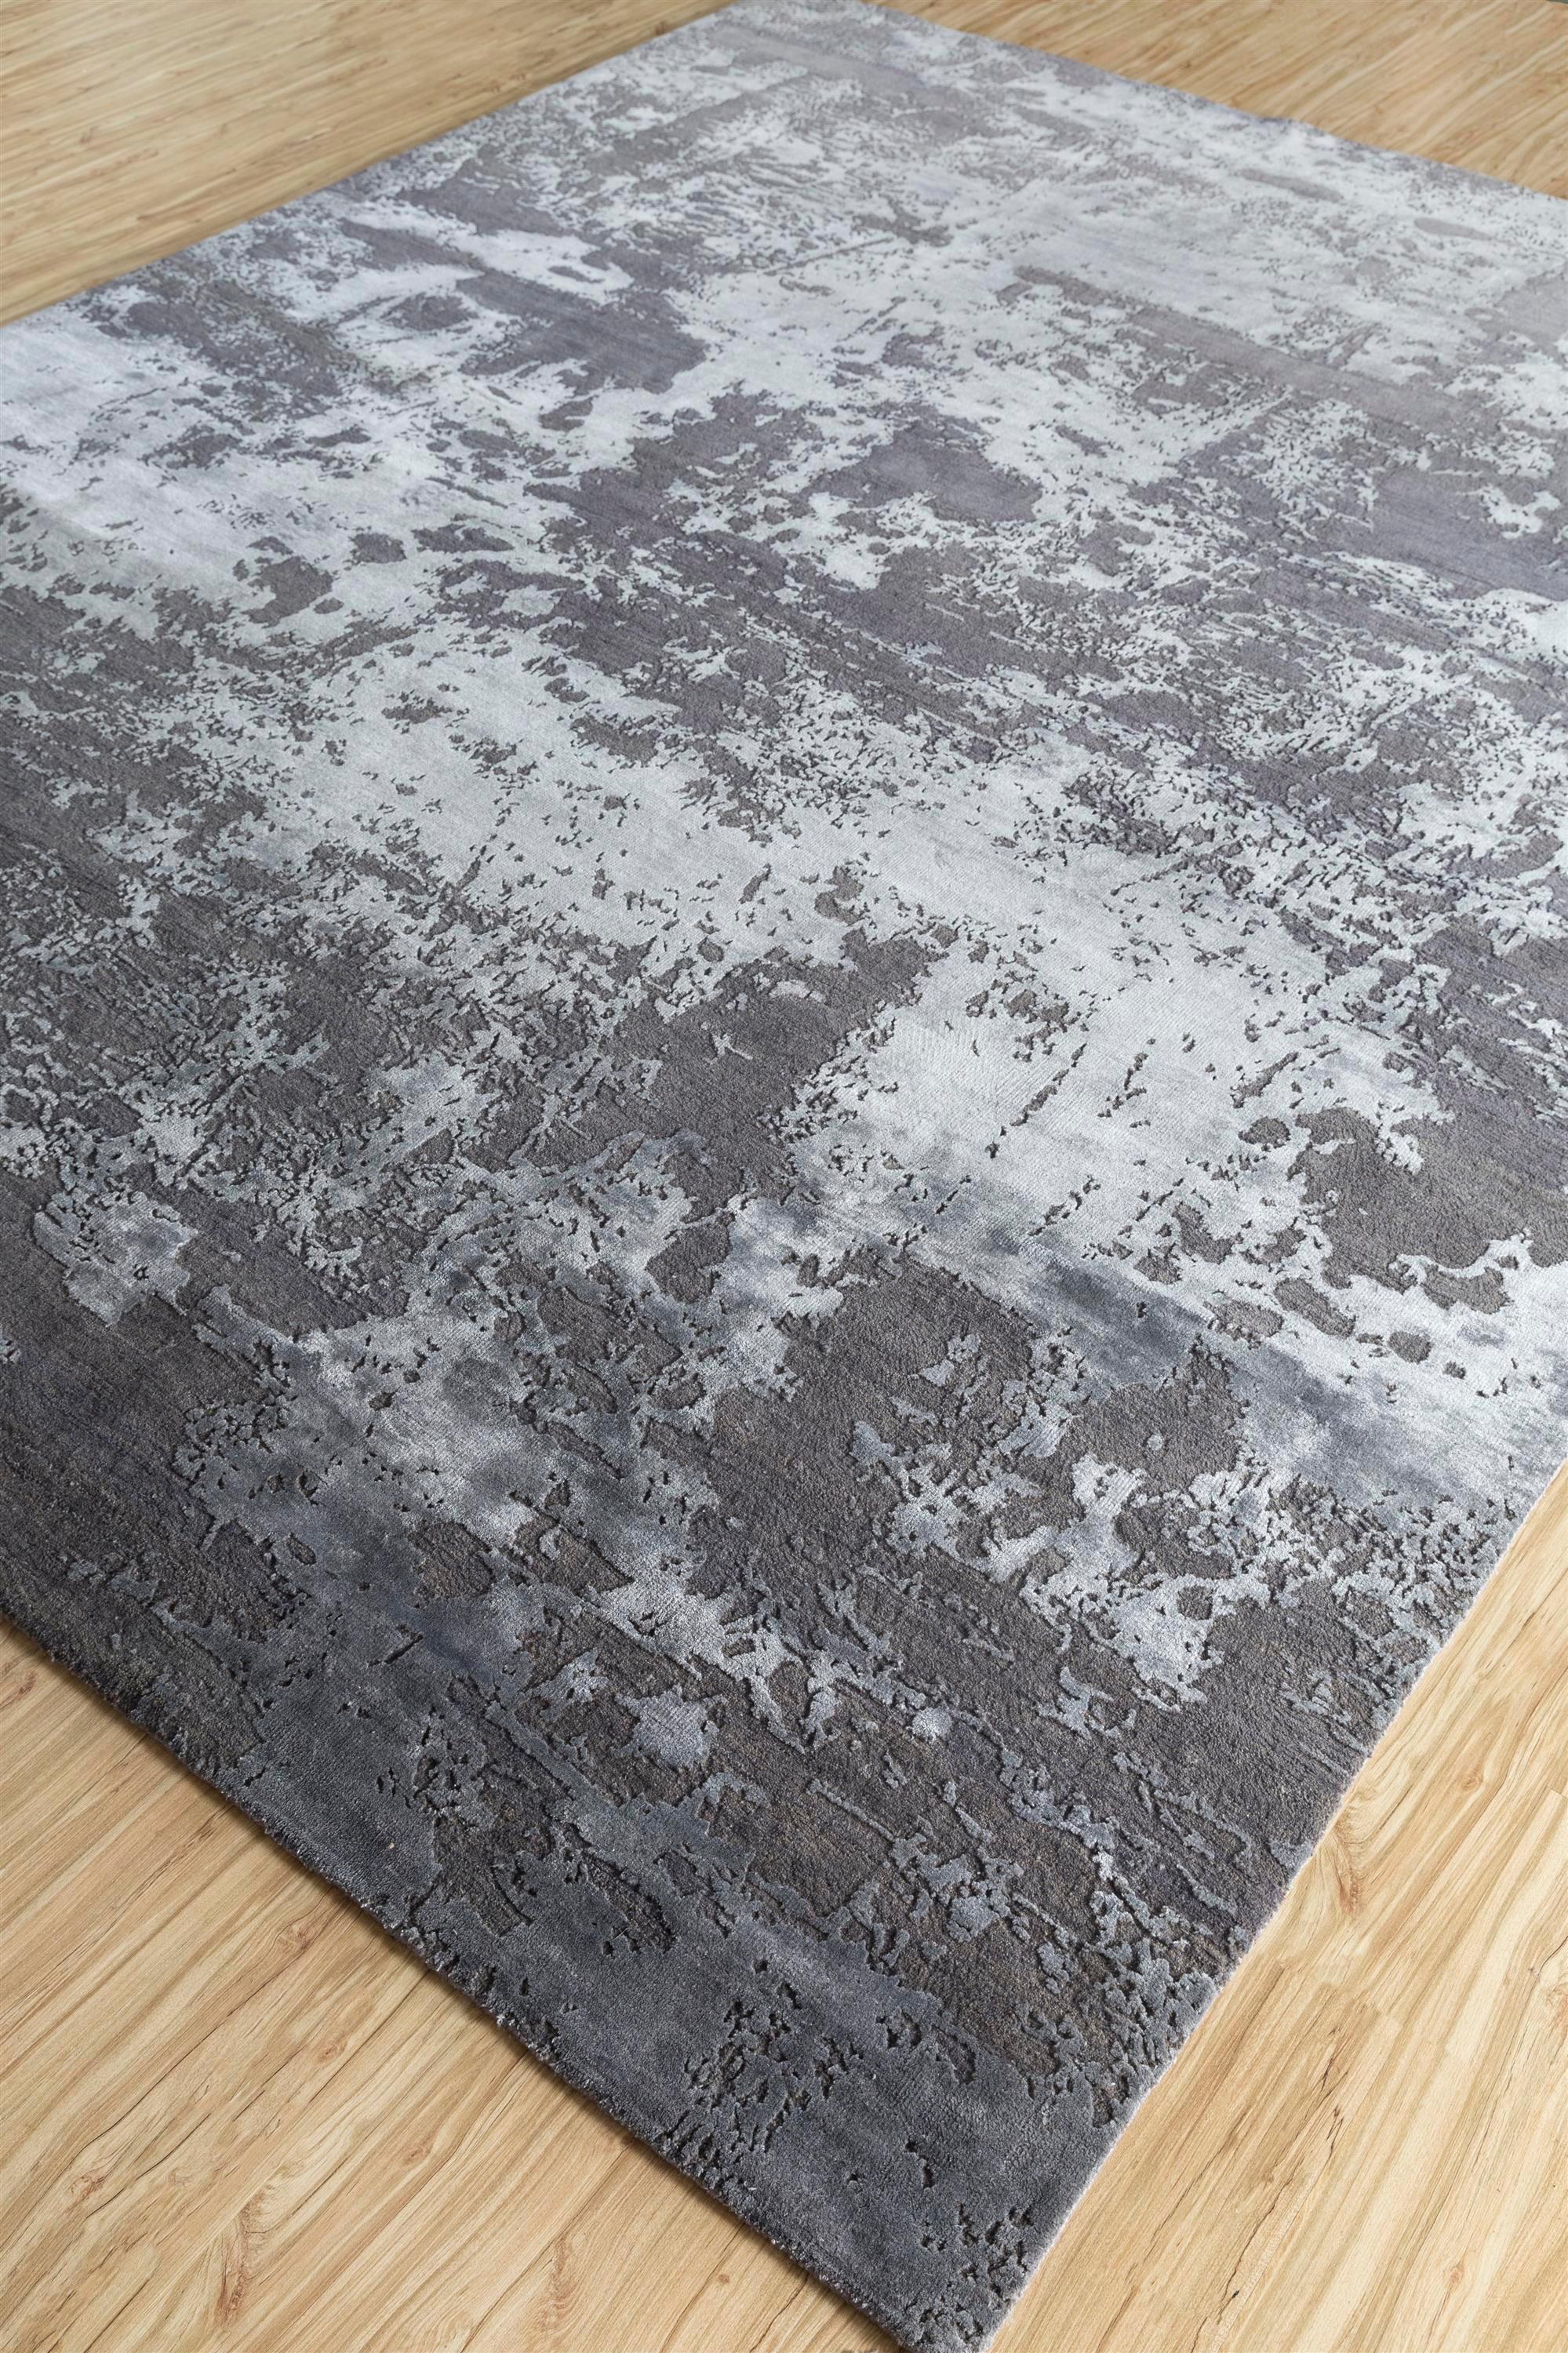 Immerse yourself in the captivating interplay of design and color with this beautiful hand-knotted rug by Jaipur Rugs from their collection Project Error by Kavi. Handknotted from a luxurious blend of wool and bamboo silk, this modern rug